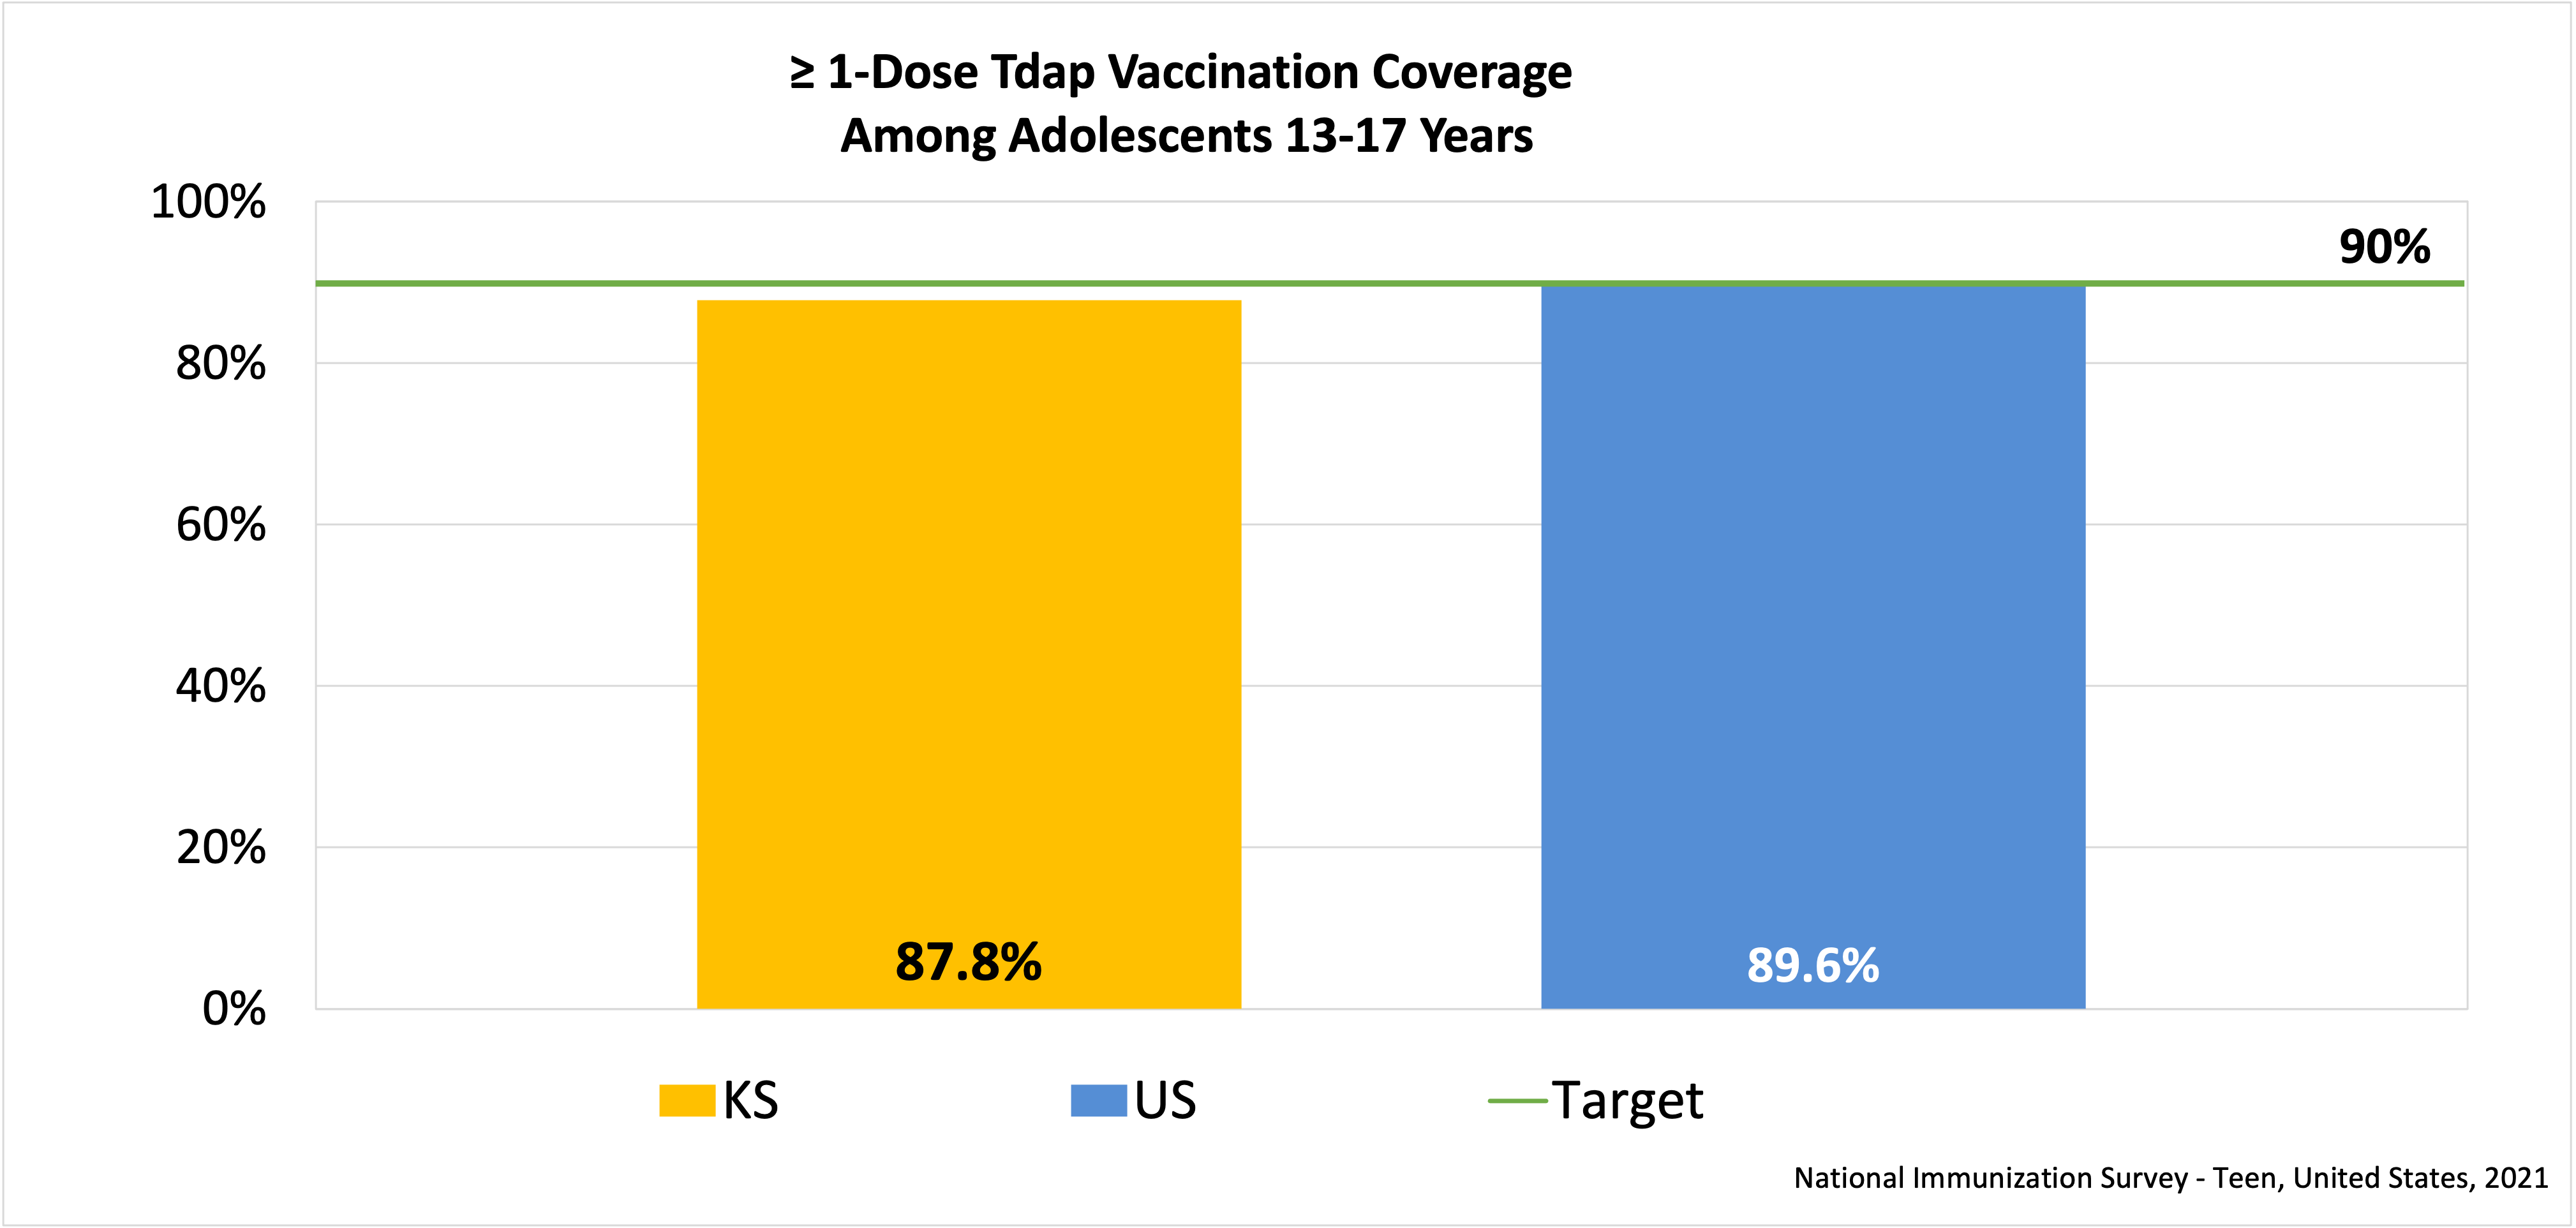 Estimated Tdap Vaccination Coverage Among Adolescents 13-17 Years